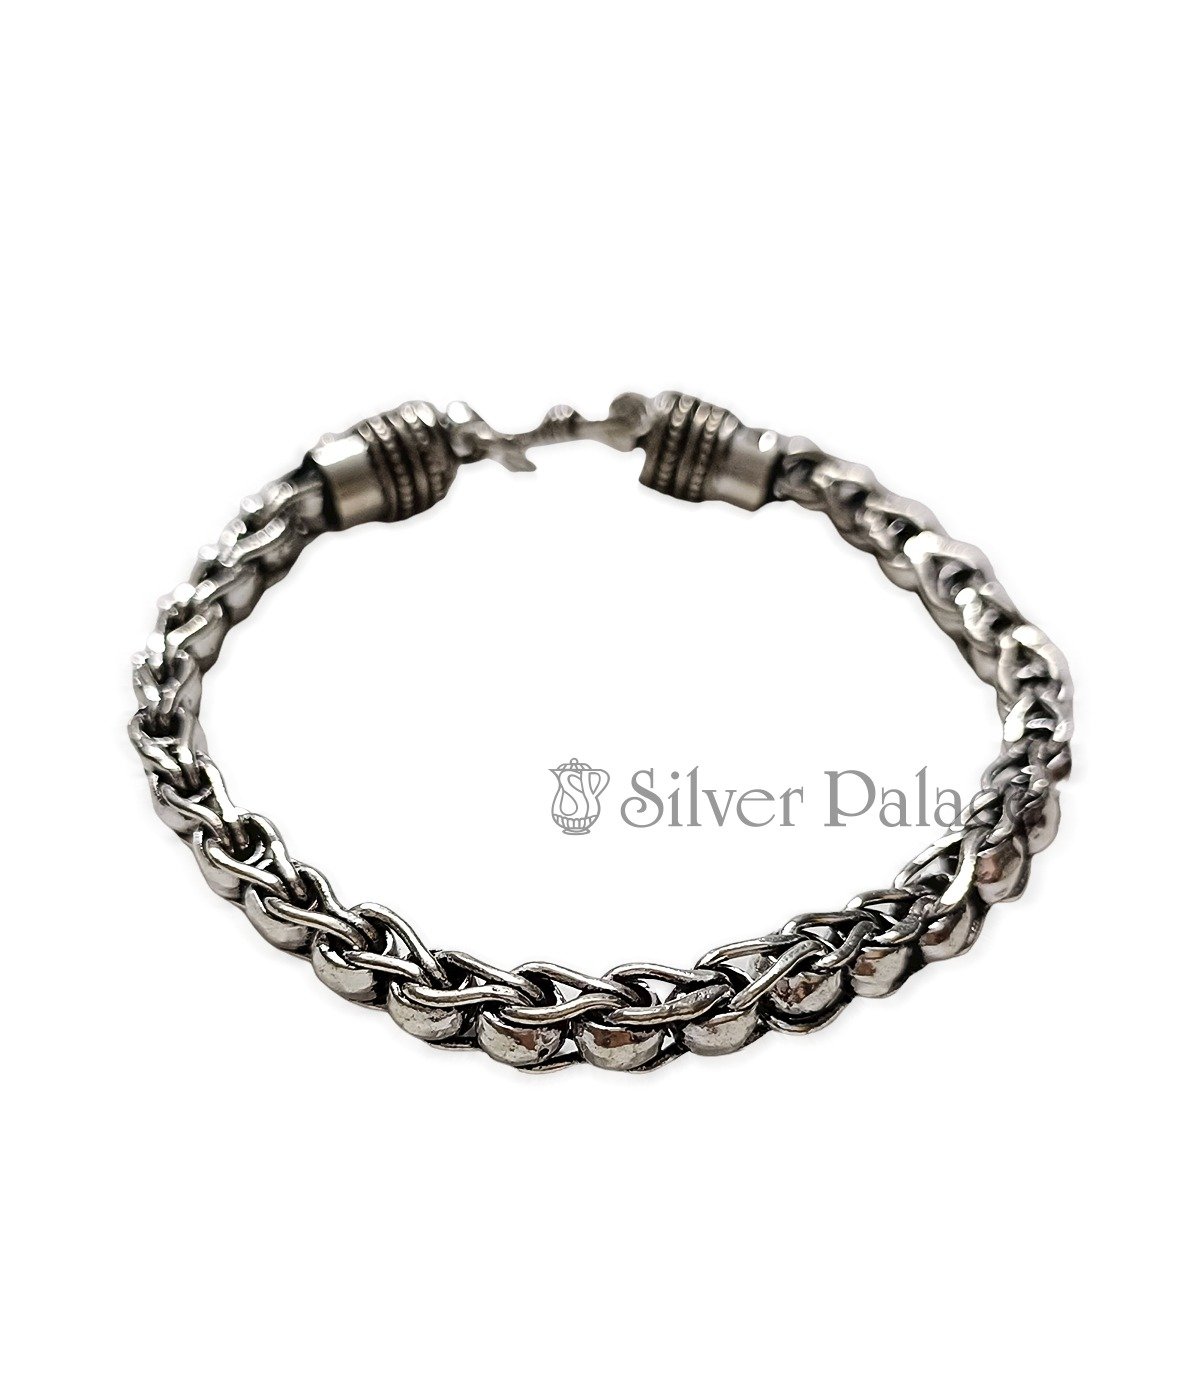 Buy Light Weight Daily Wear Chain Type Simple Bracelet at Best Price